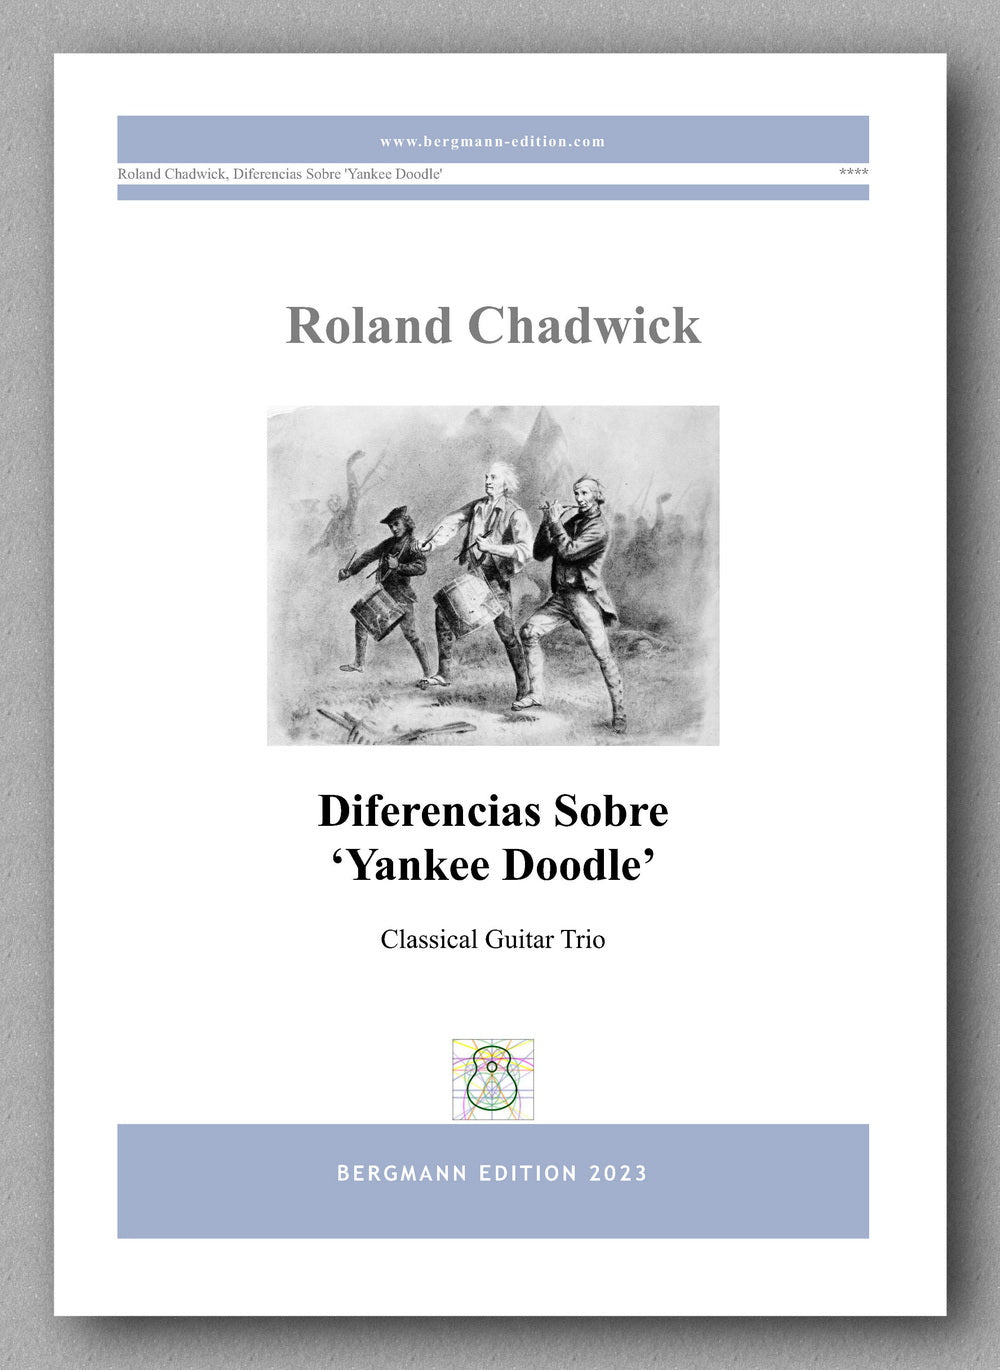 Roland Chadwick, Diferencias Sobre ‘Yankee Doodle’ - preview of the cover